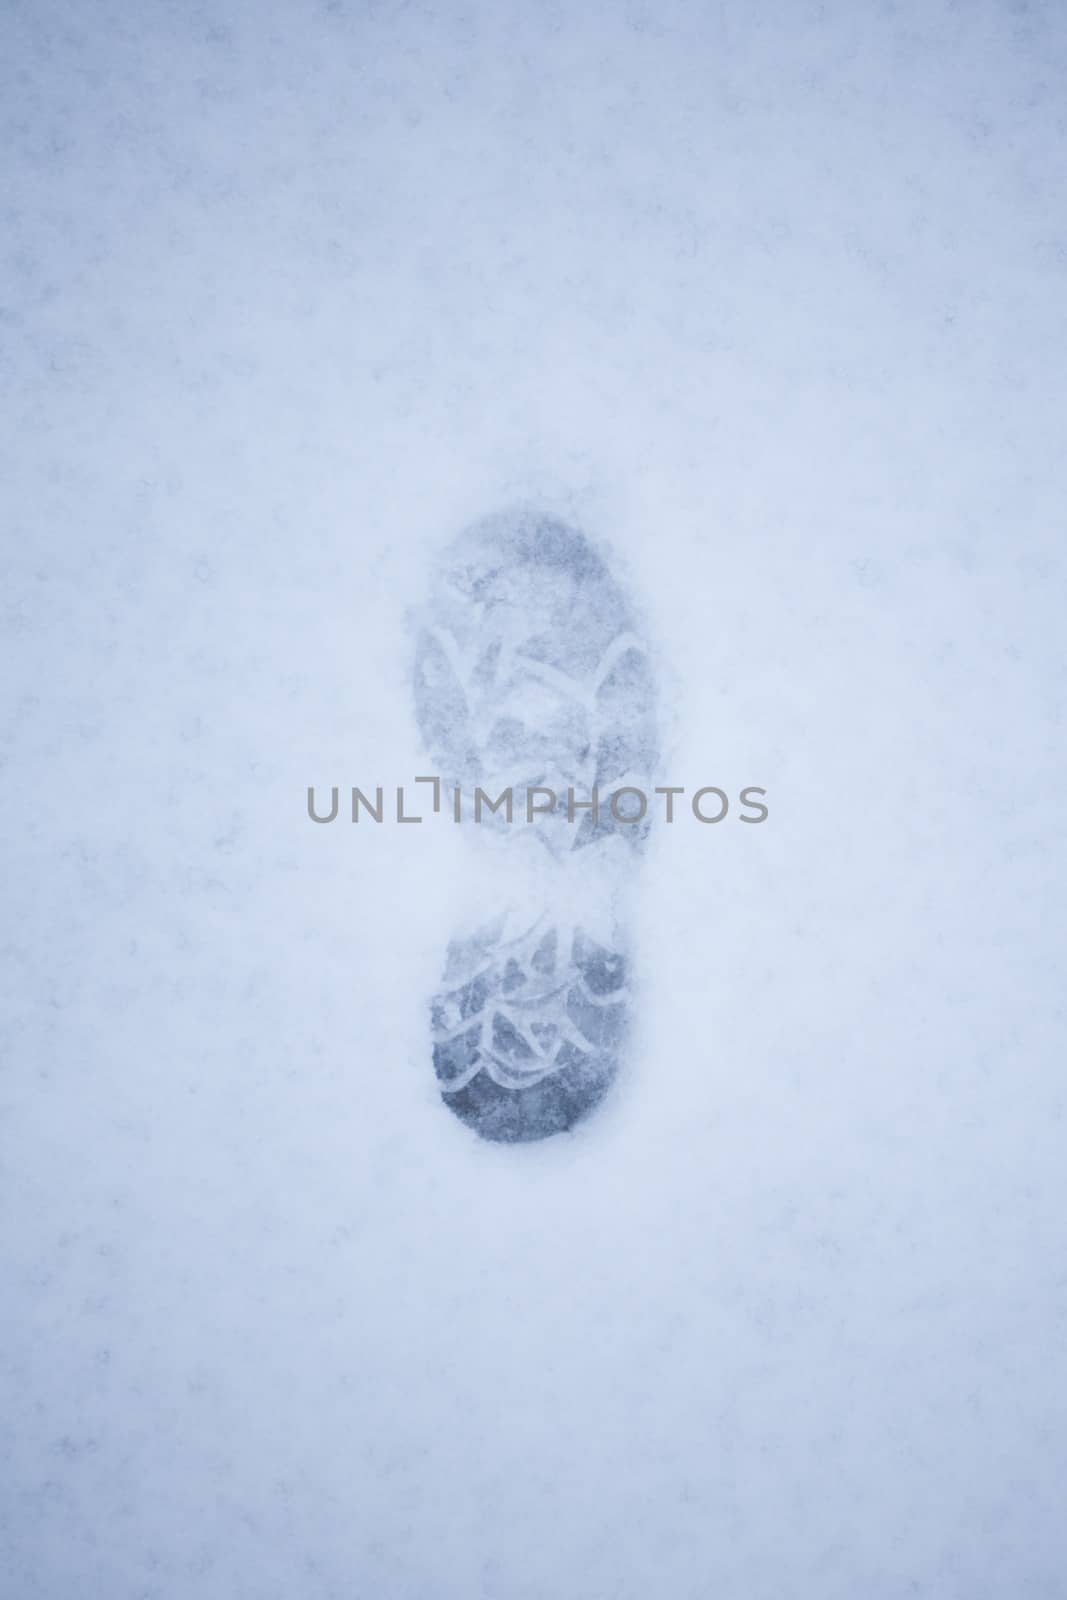 A single footprint in the snow